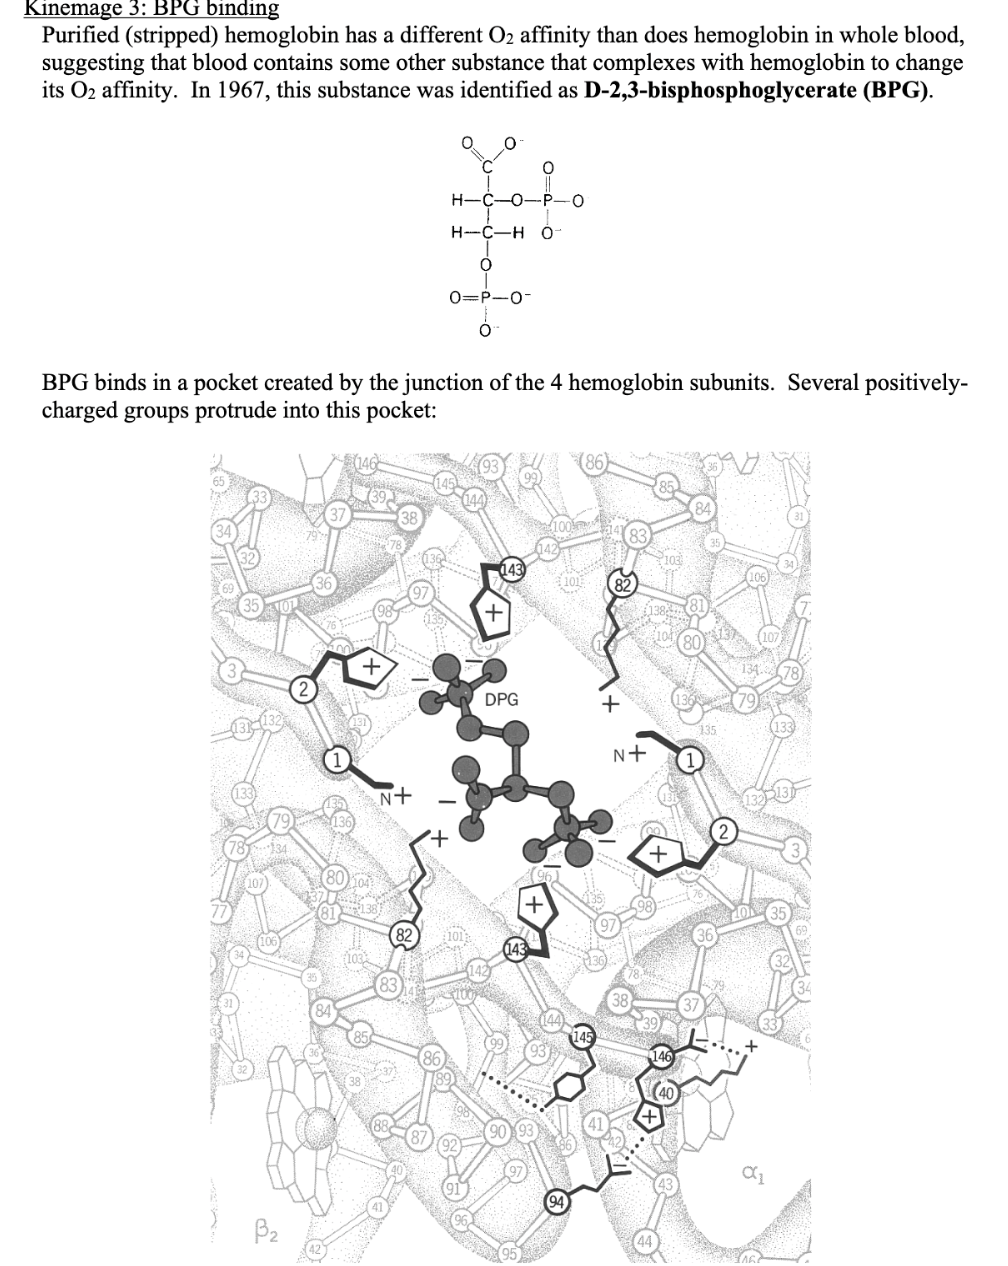 Kinemage 3: BPG binding
Purified (stripped) hemoglobin has a different O2 affinity than does hemoglobin in whole blood,
suggesting that blood contains some other substance that complexes with hemoglobin to change
its O2 affinity. In 1967, this substance was identified as D-2,3-bisphosphoglycerate (BPG).
H-C-0-P-0
H-C-H Ó
0=P-0-
BPG binds in a pocket created by the junction of the 4 hemoglobin subunits. Several positively-
charged groups protrude into this pocket:
83
P103
143
82.
78
DPG
N+
n+
643
B2
